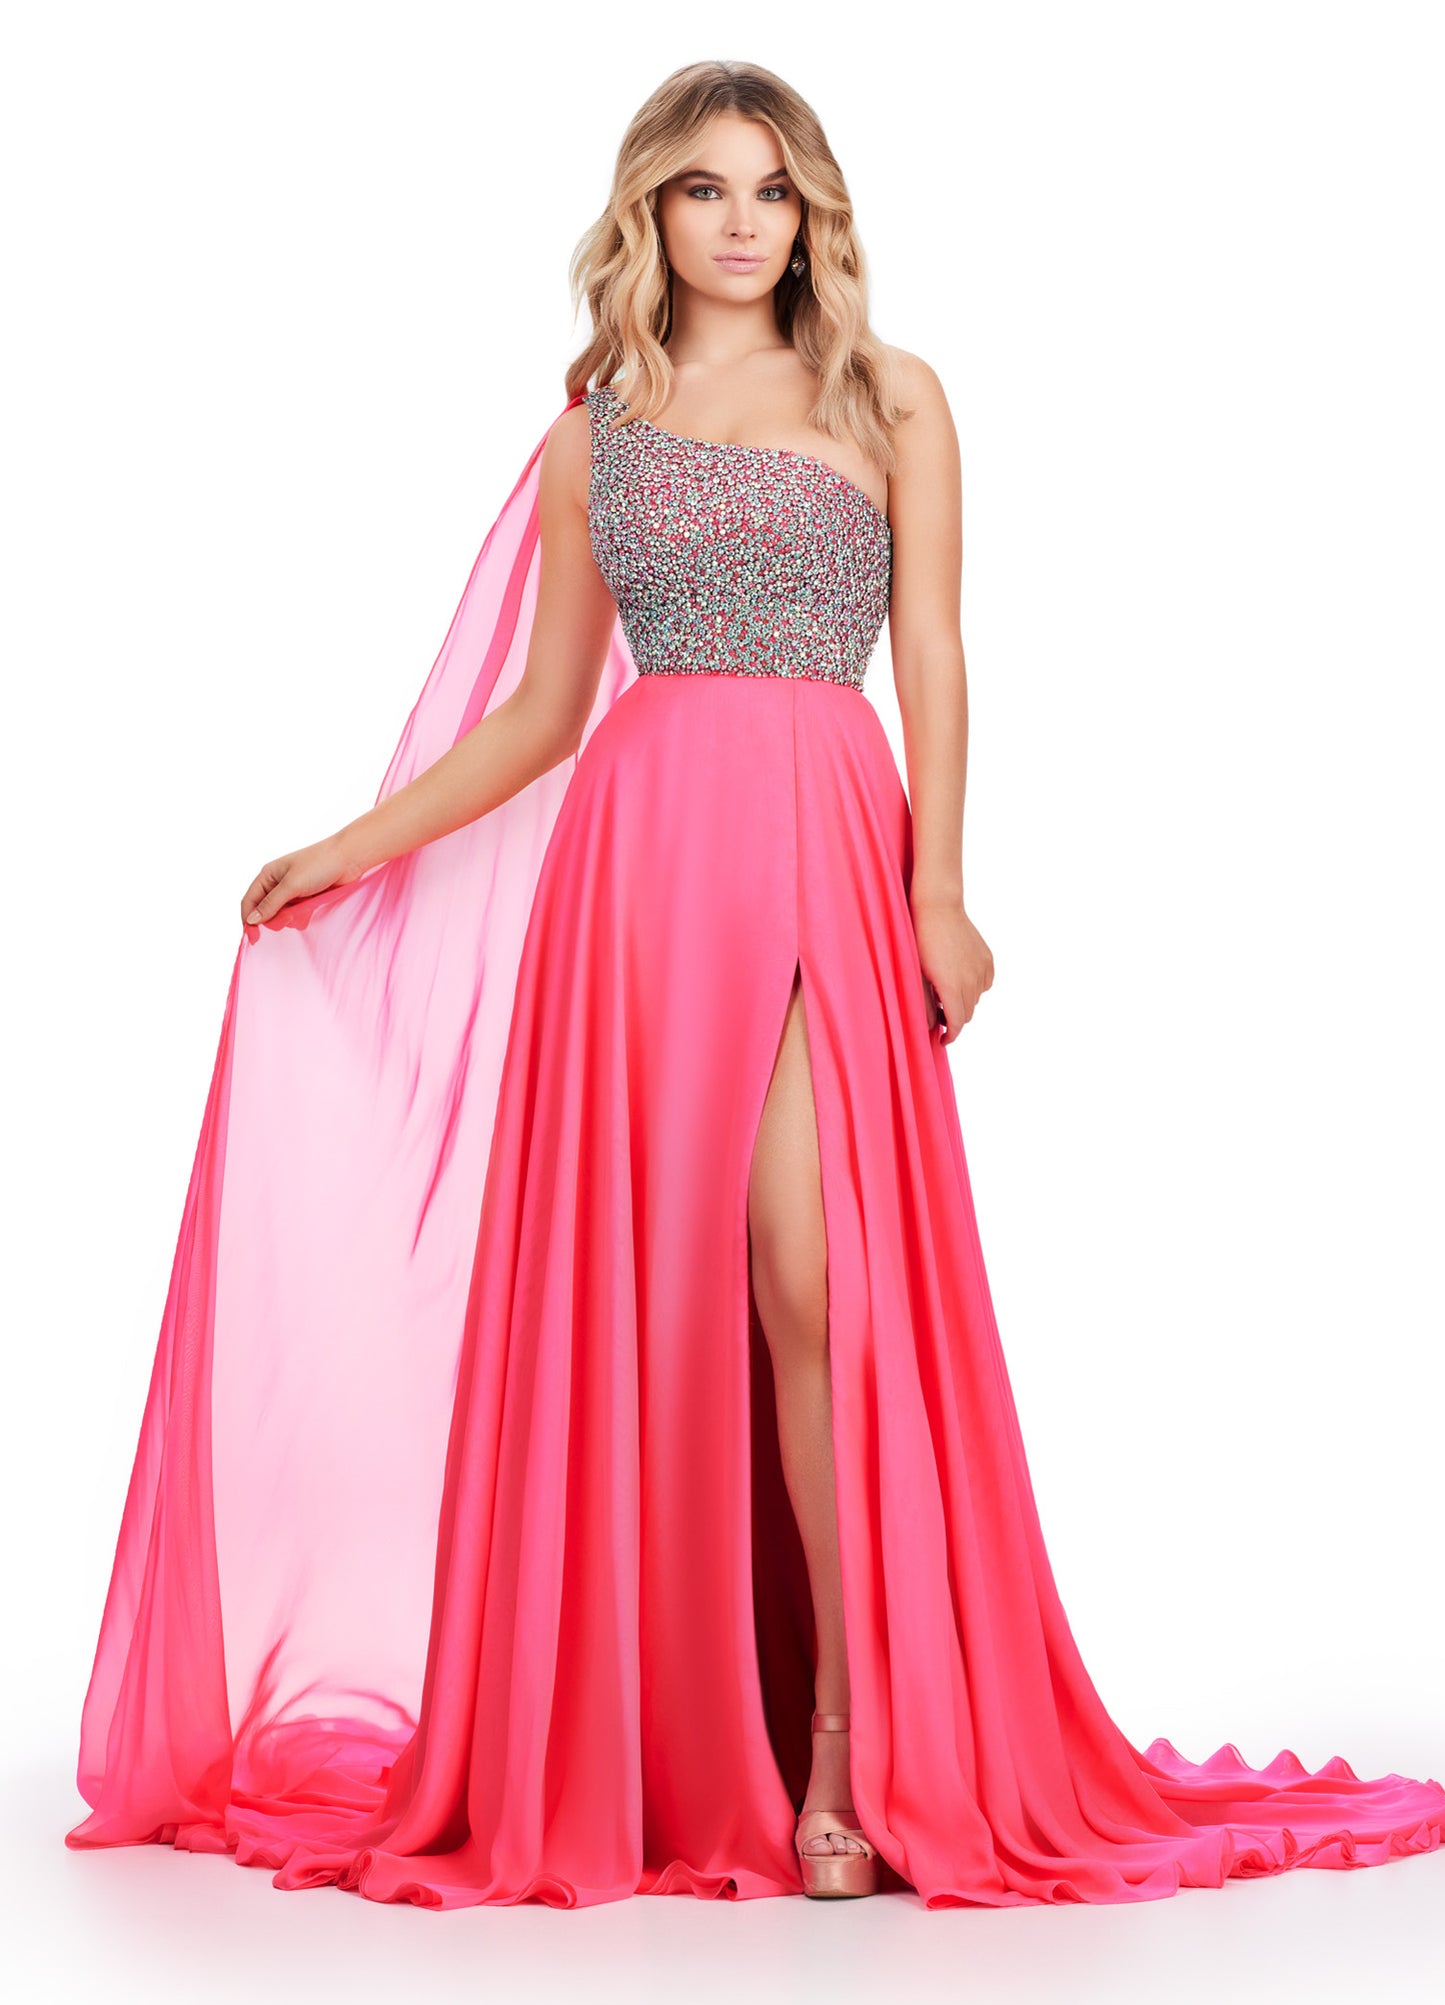 Introducing the show-stopping Ashley Lauren 11482 Long Prom Dress! This elegant gown features a one-shoulder design and flowing chiffon fabric, perfect for any formal occasion. The stunning beaded bustier adds a touch of sparkle and glamour, making you the center of attention. Elevate your style with this must-have pageant gown. A dress fit for a queen!